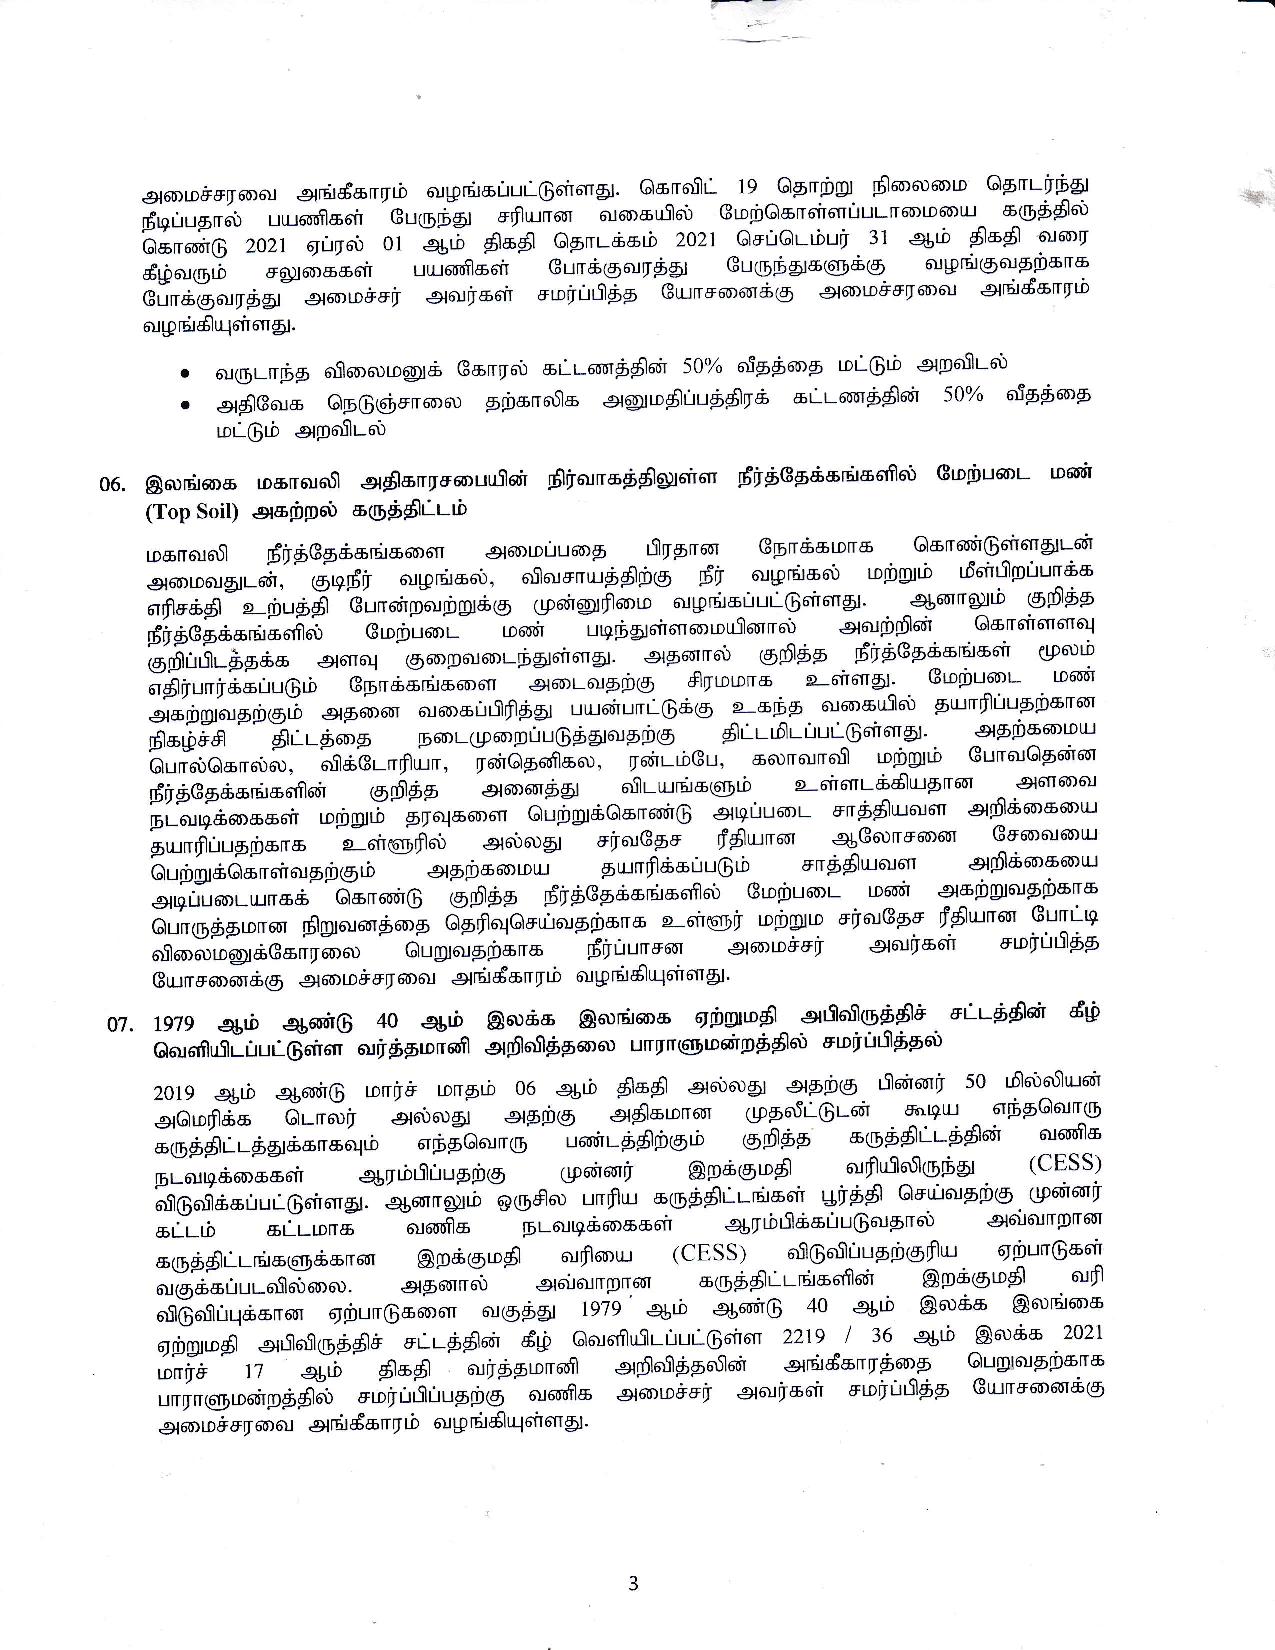 Cabinet Decision on 10.05.2021 Tamil page 003